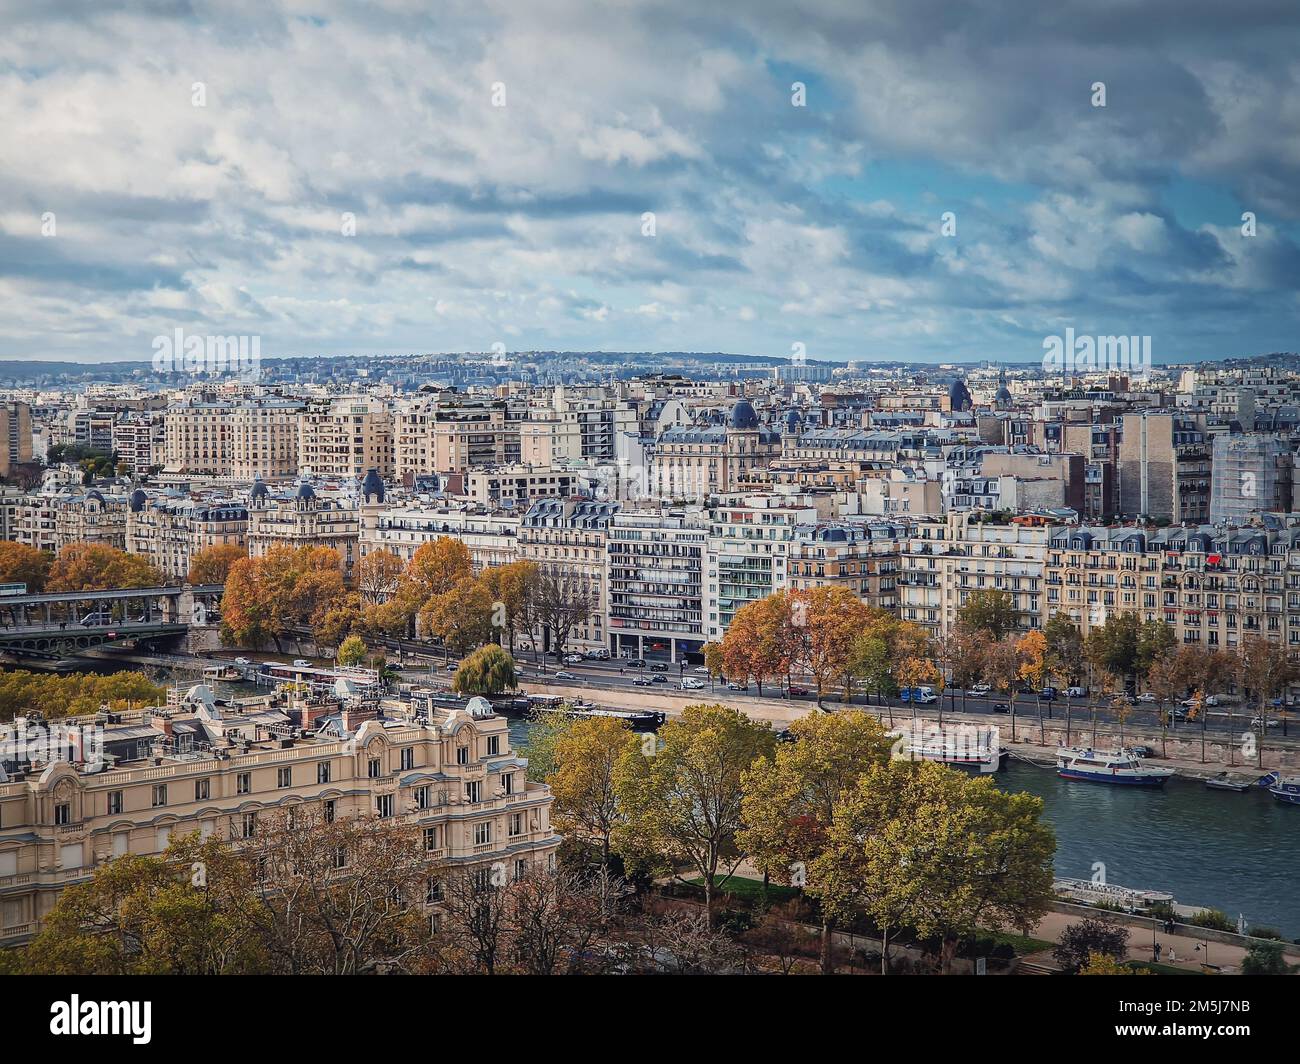 Paris cityscape over the Seine river, view from the Eiffel tower height, France. Fall season scene with colorful yellow trees Stock Photo